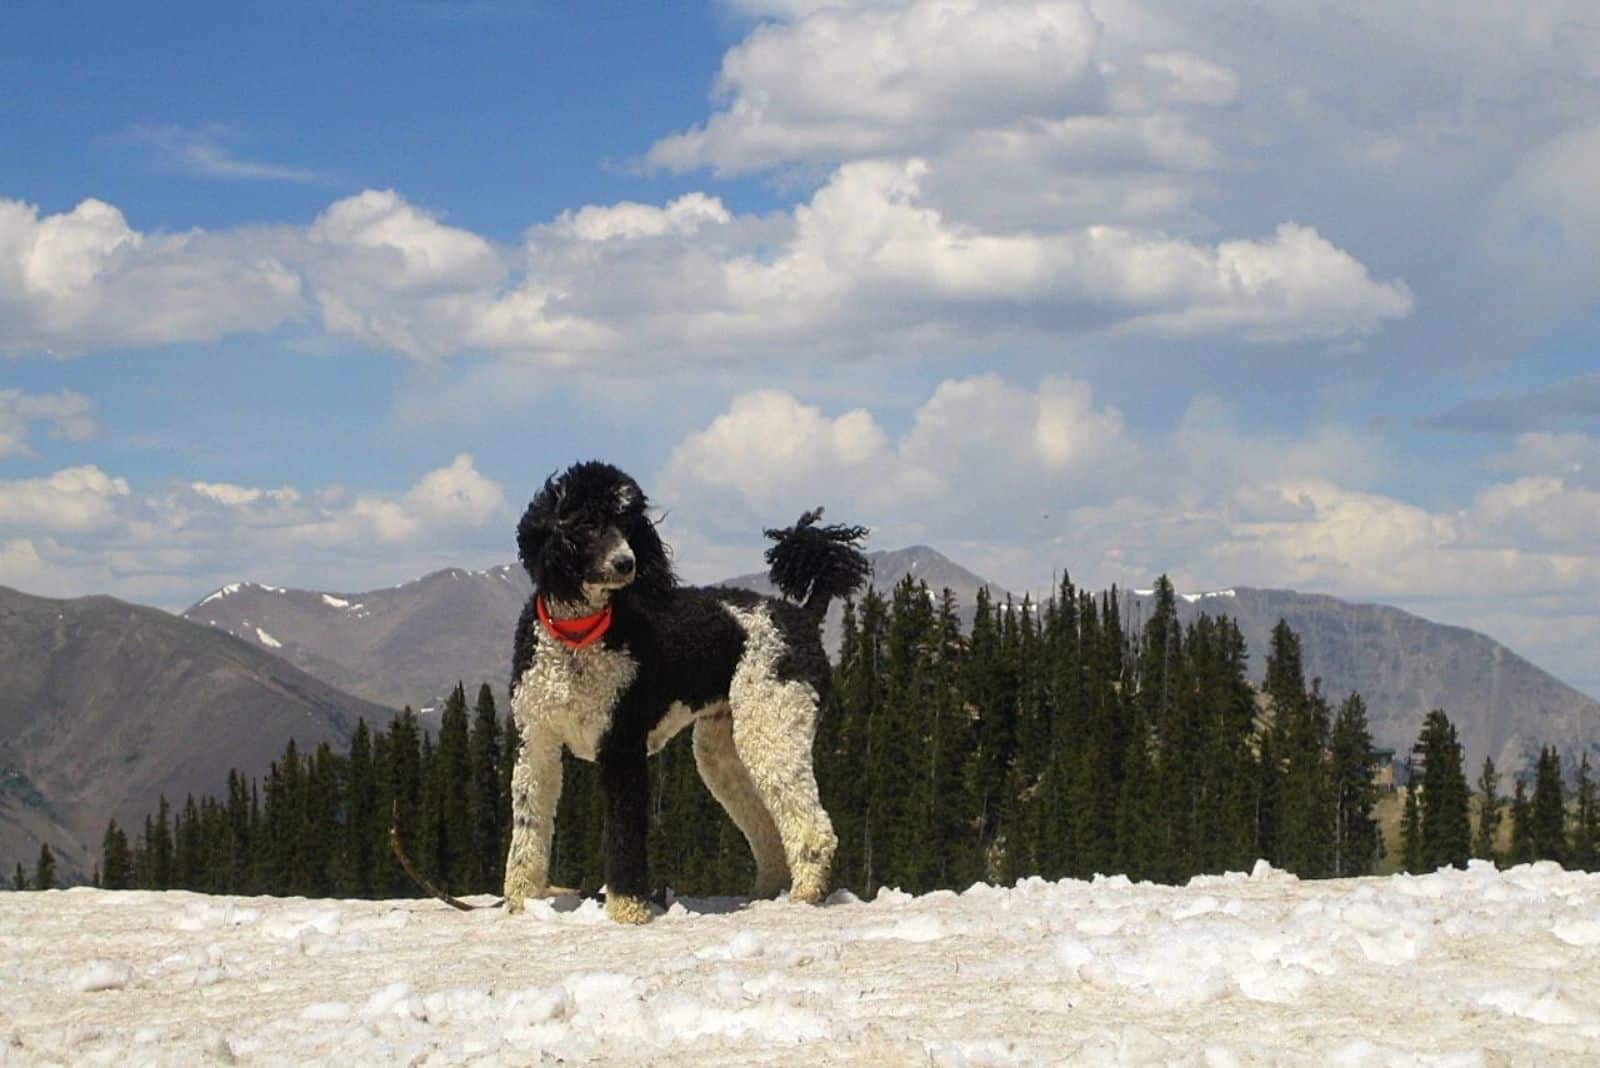 Parti Poodle stands in the snow on the mountain